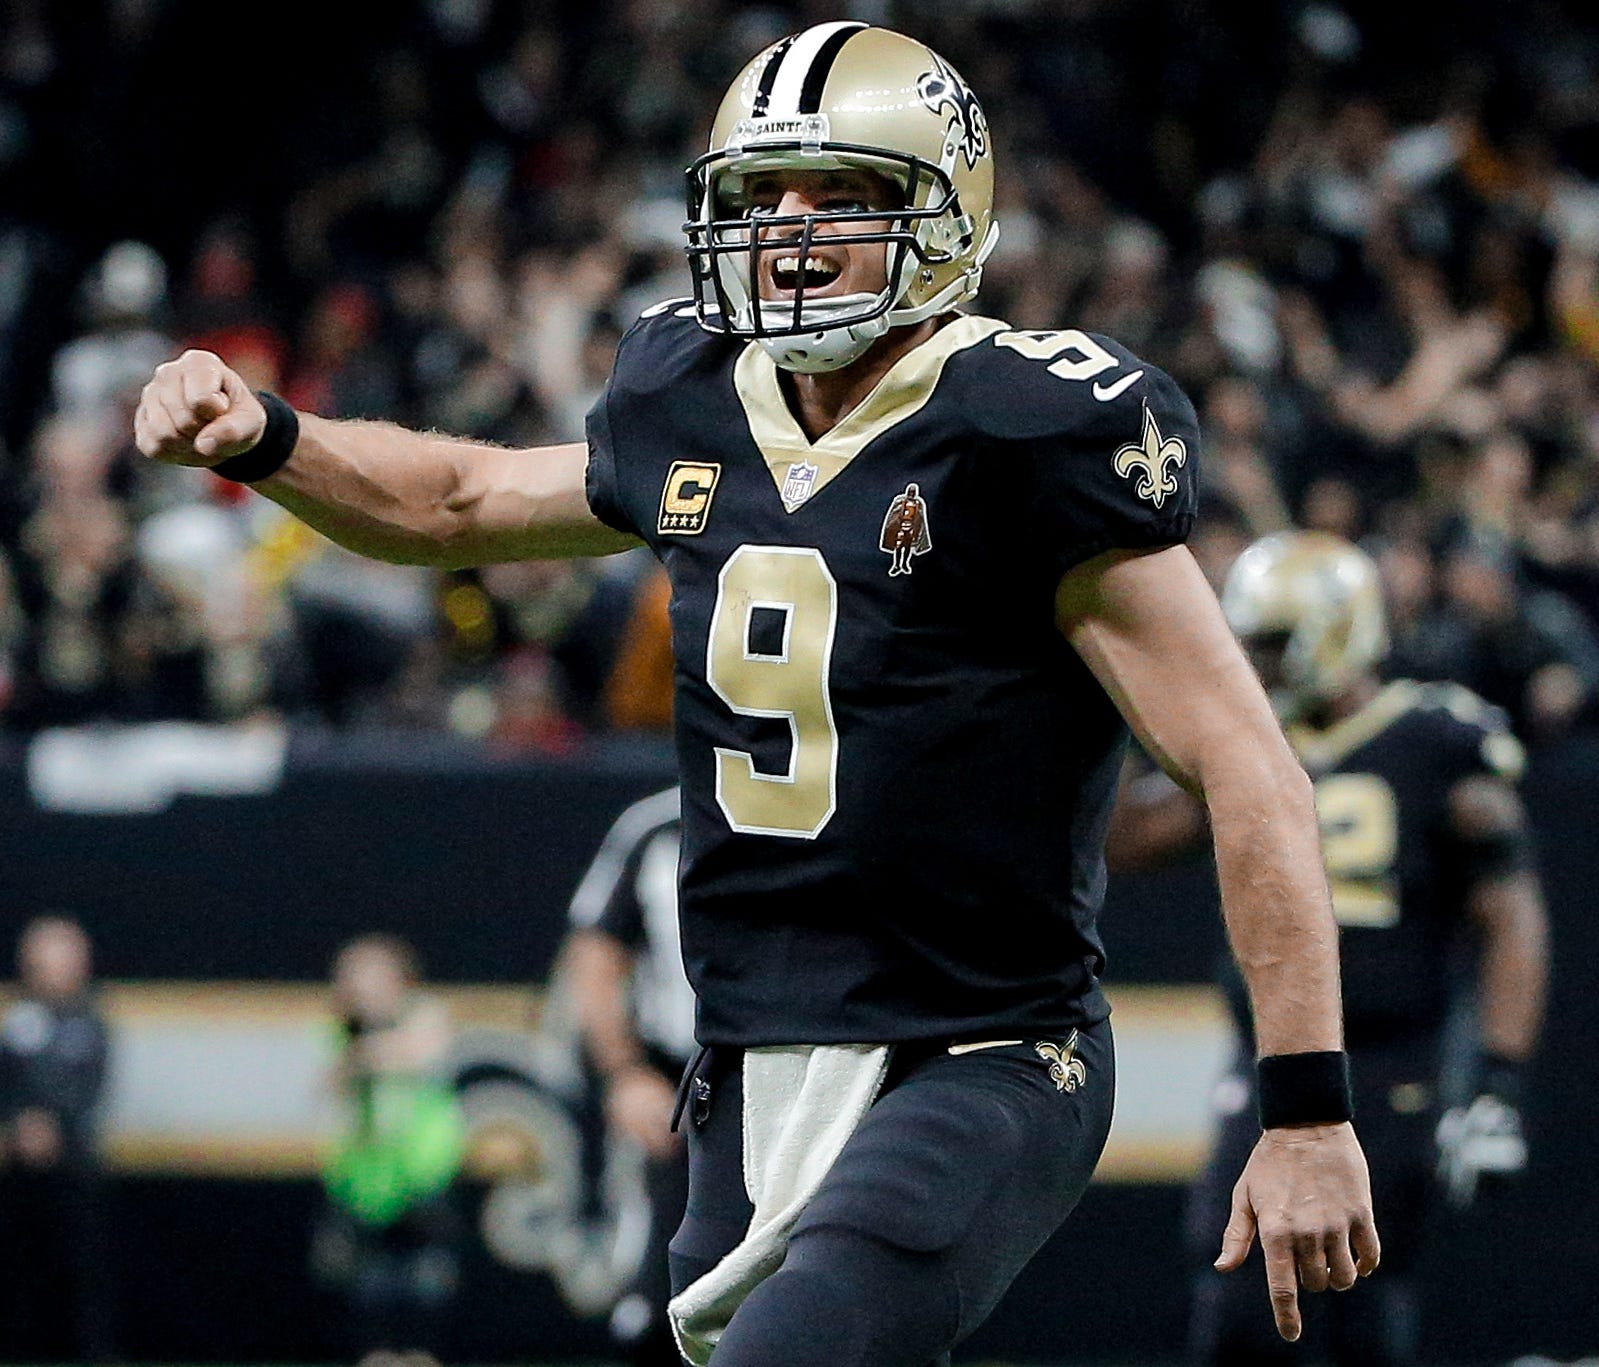 New Orleans Saints quarterback Drew Brees (9) celebrates after throwing a touchdown to wide receiver Ted Ginn during the second quarter against the Atlanta Falcons at the Mercedes-Benz Superdome.